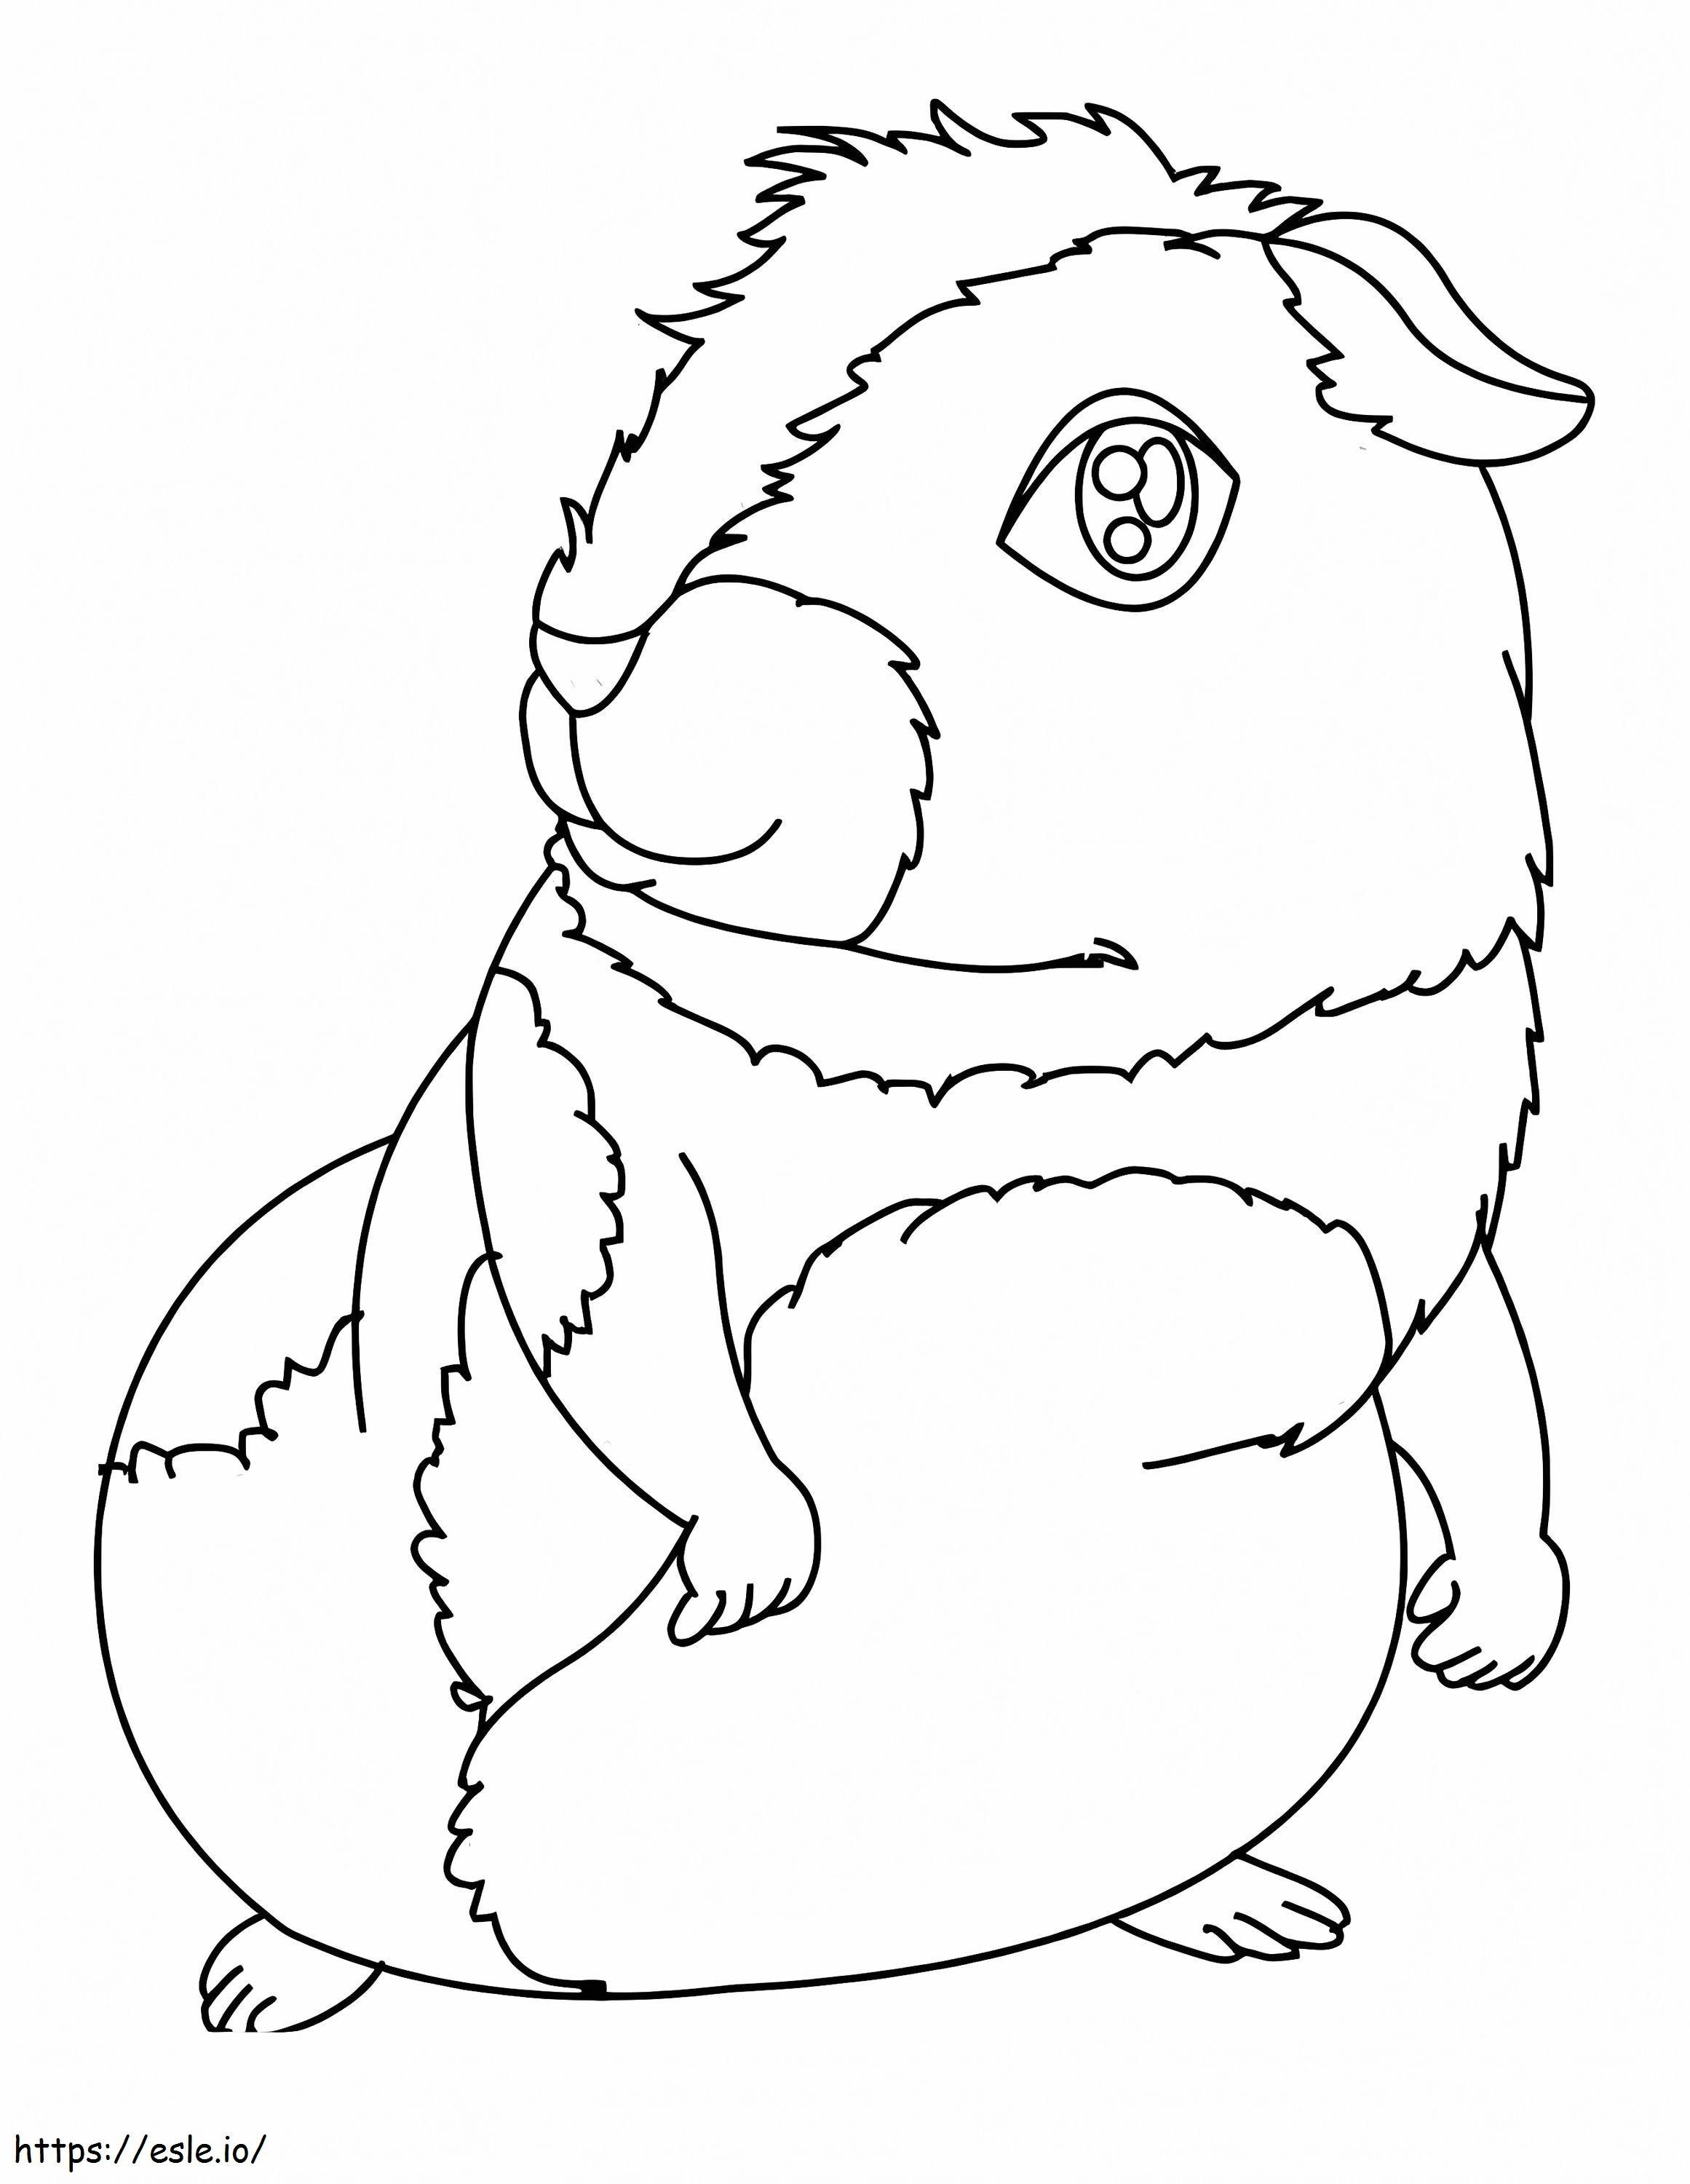 Printable Guinea Pig coloring page